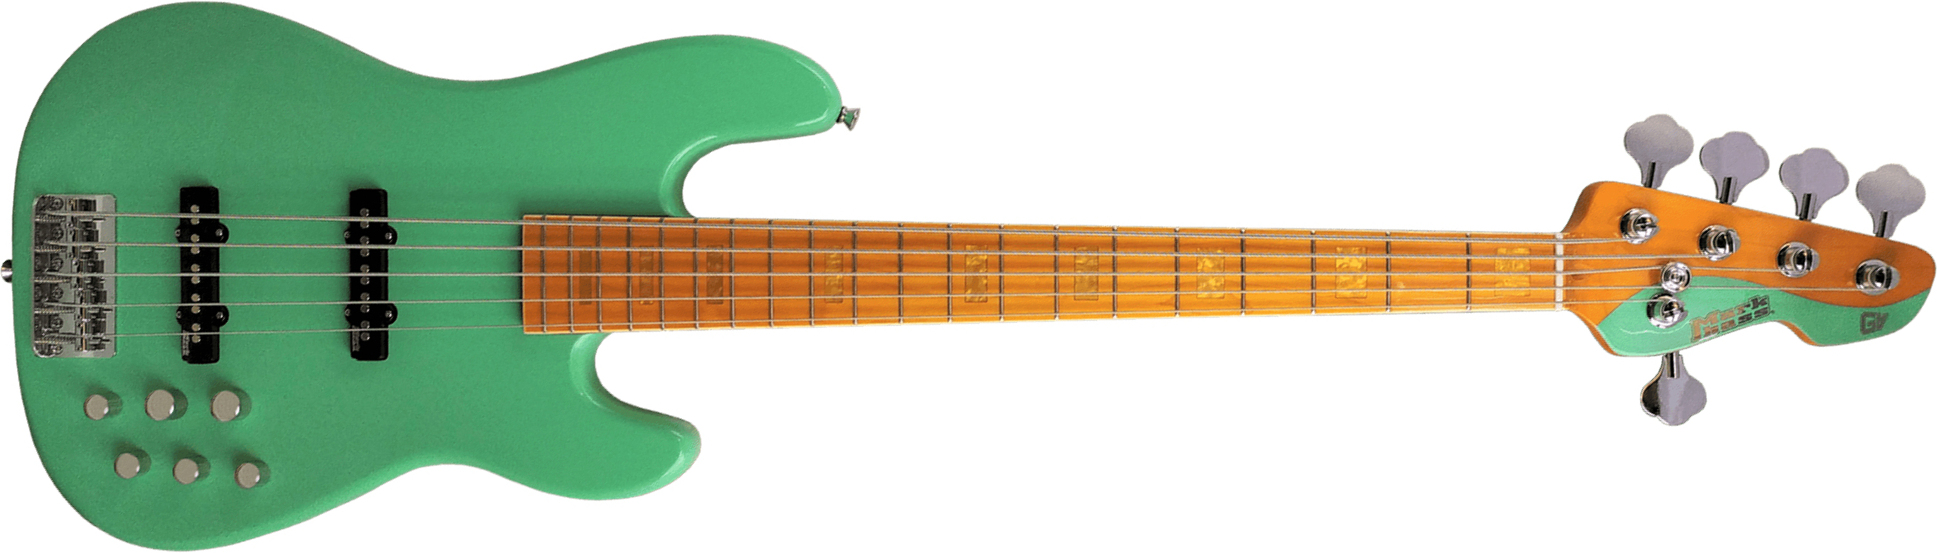 Markbass Mb Gv 5 Gloxy Val Cr Mp 5c Active Mn - Surf Green - Basse Électrique Solid Body - Main picture